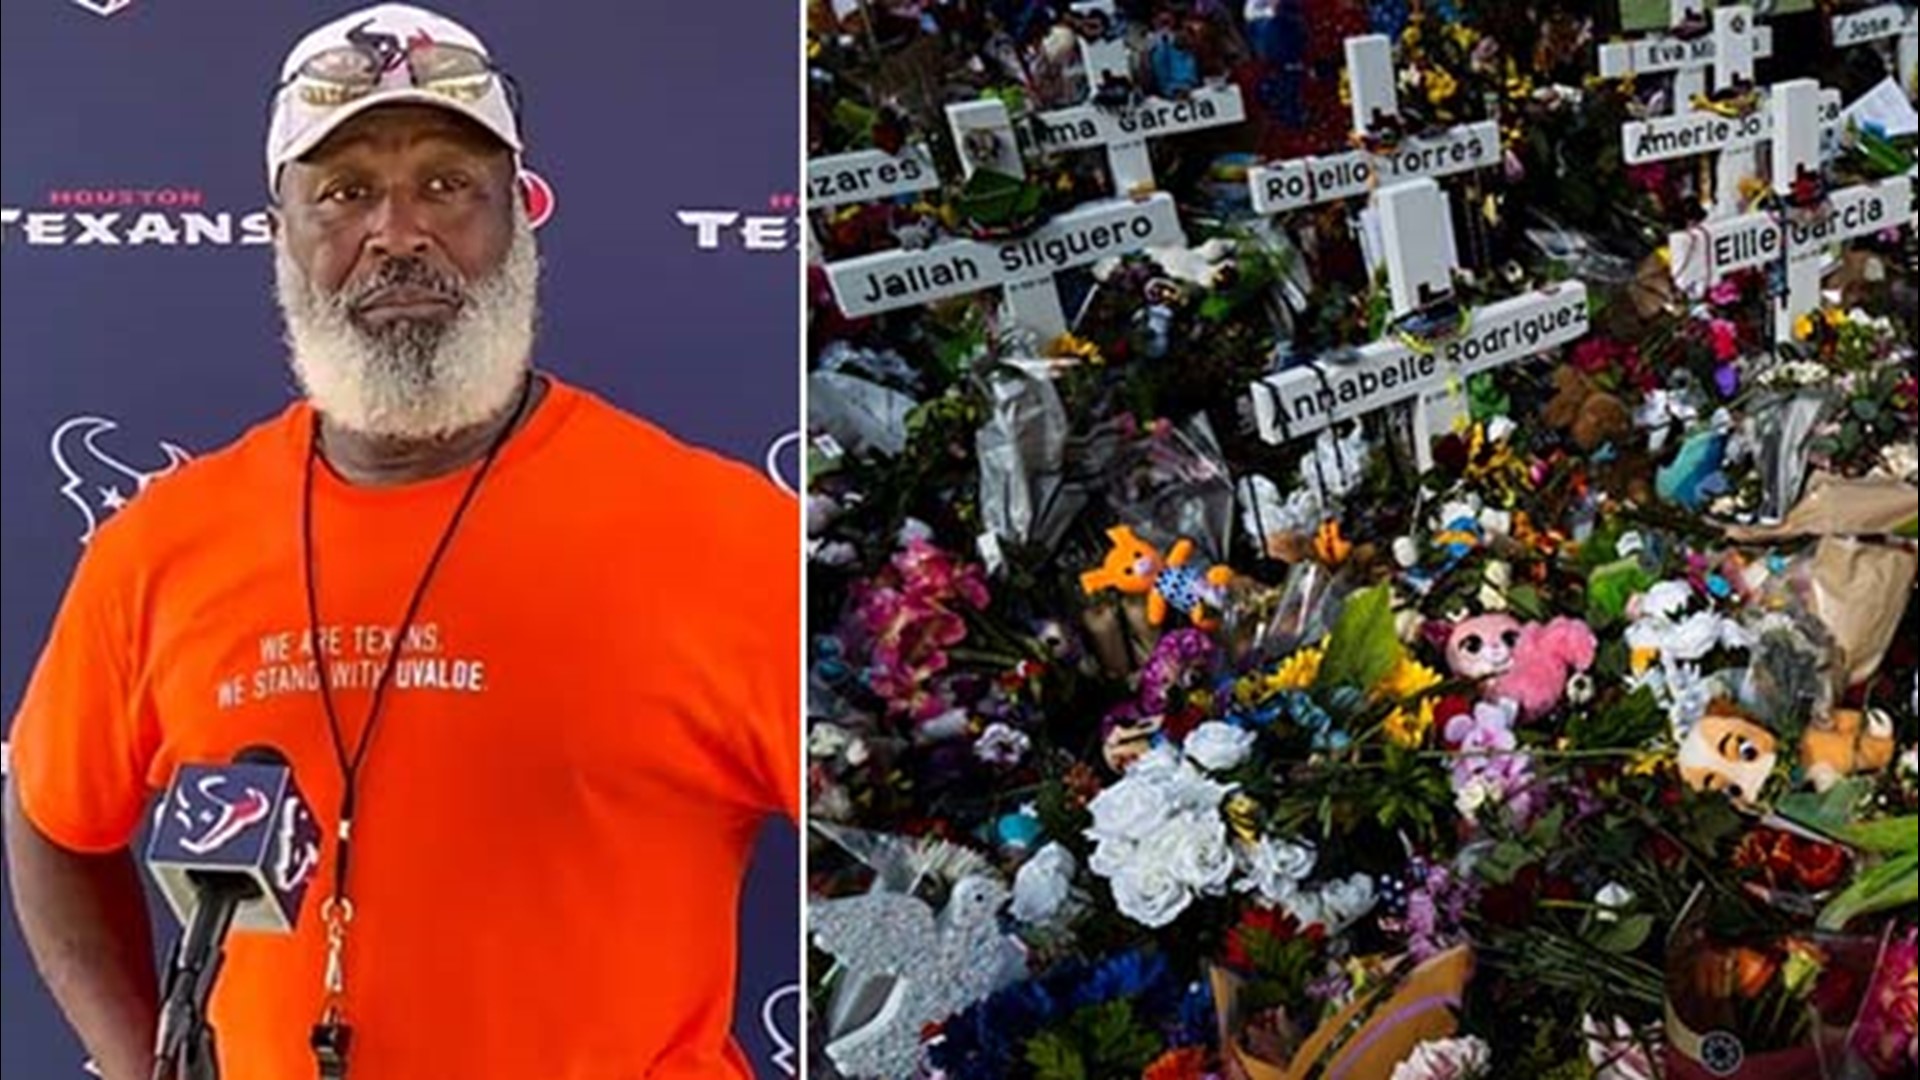 "Whether it be a church, grocery store or school … some place should be sacred to us," Coach Lovie Smith said. "Just seems like something has to be done.”